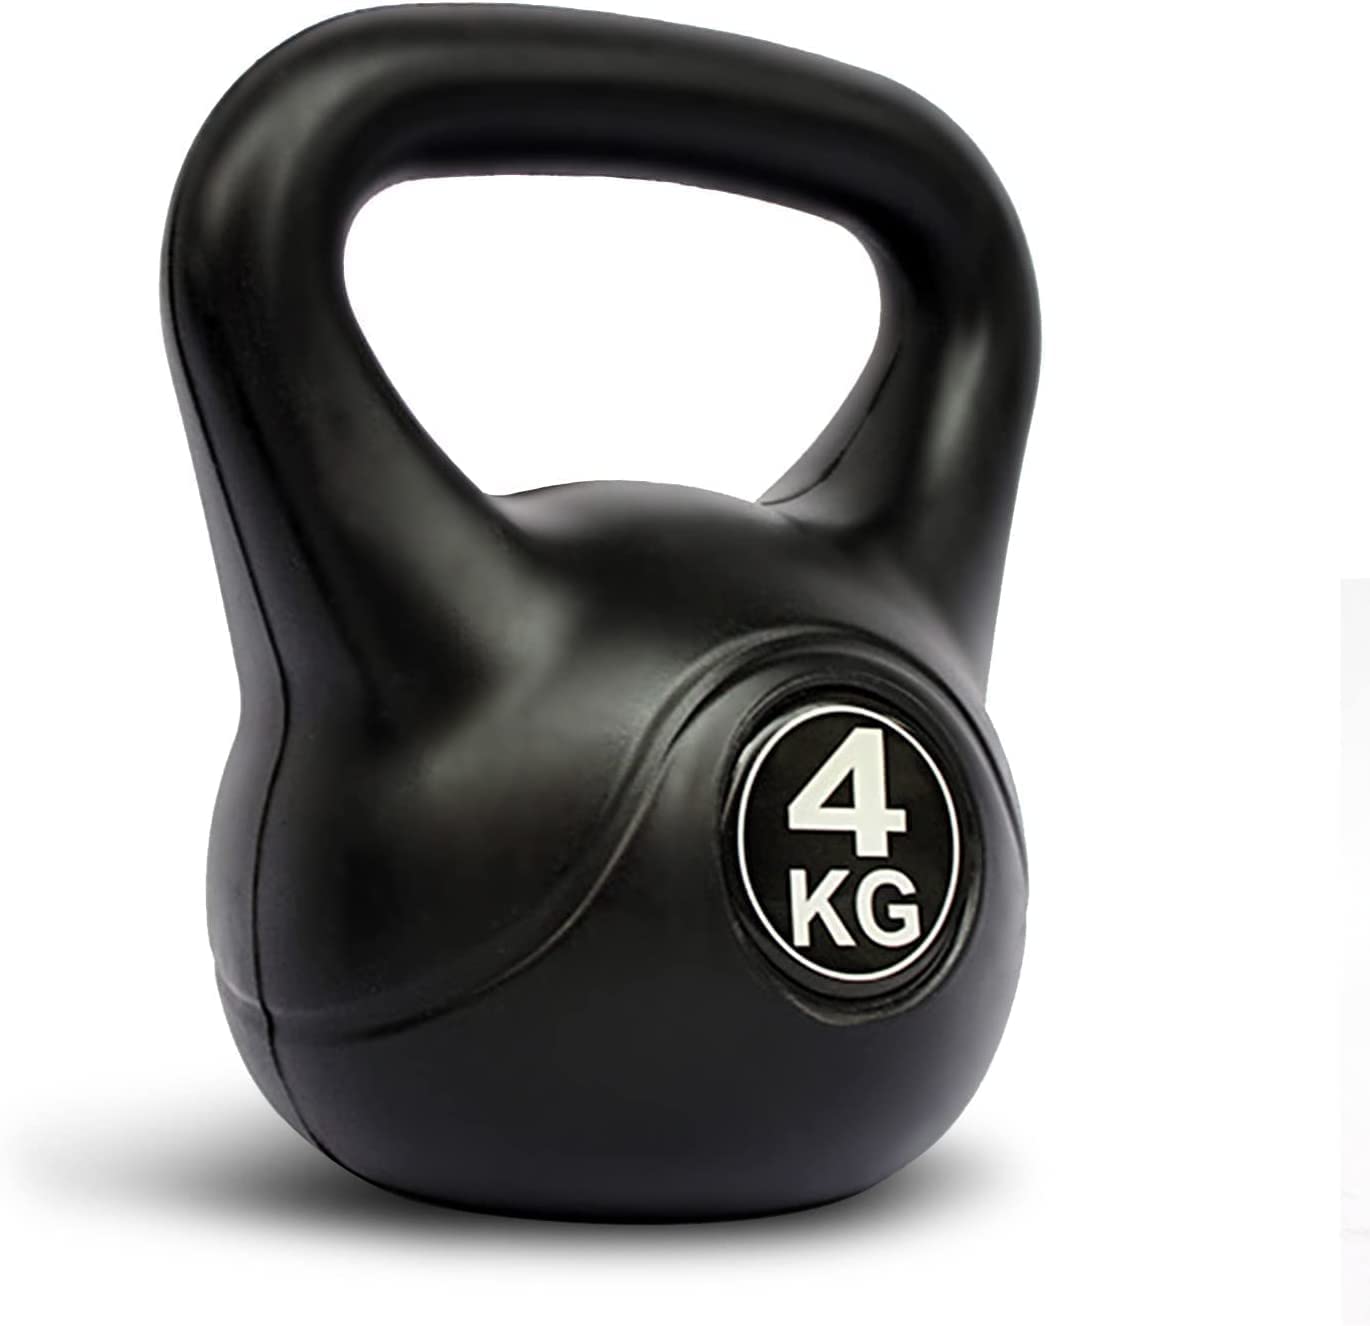 VIO Kettlebell dumbbell for Strength and Cardio Training Fitness,Heavy Weight Kettle Bell for Home Gym BLACK